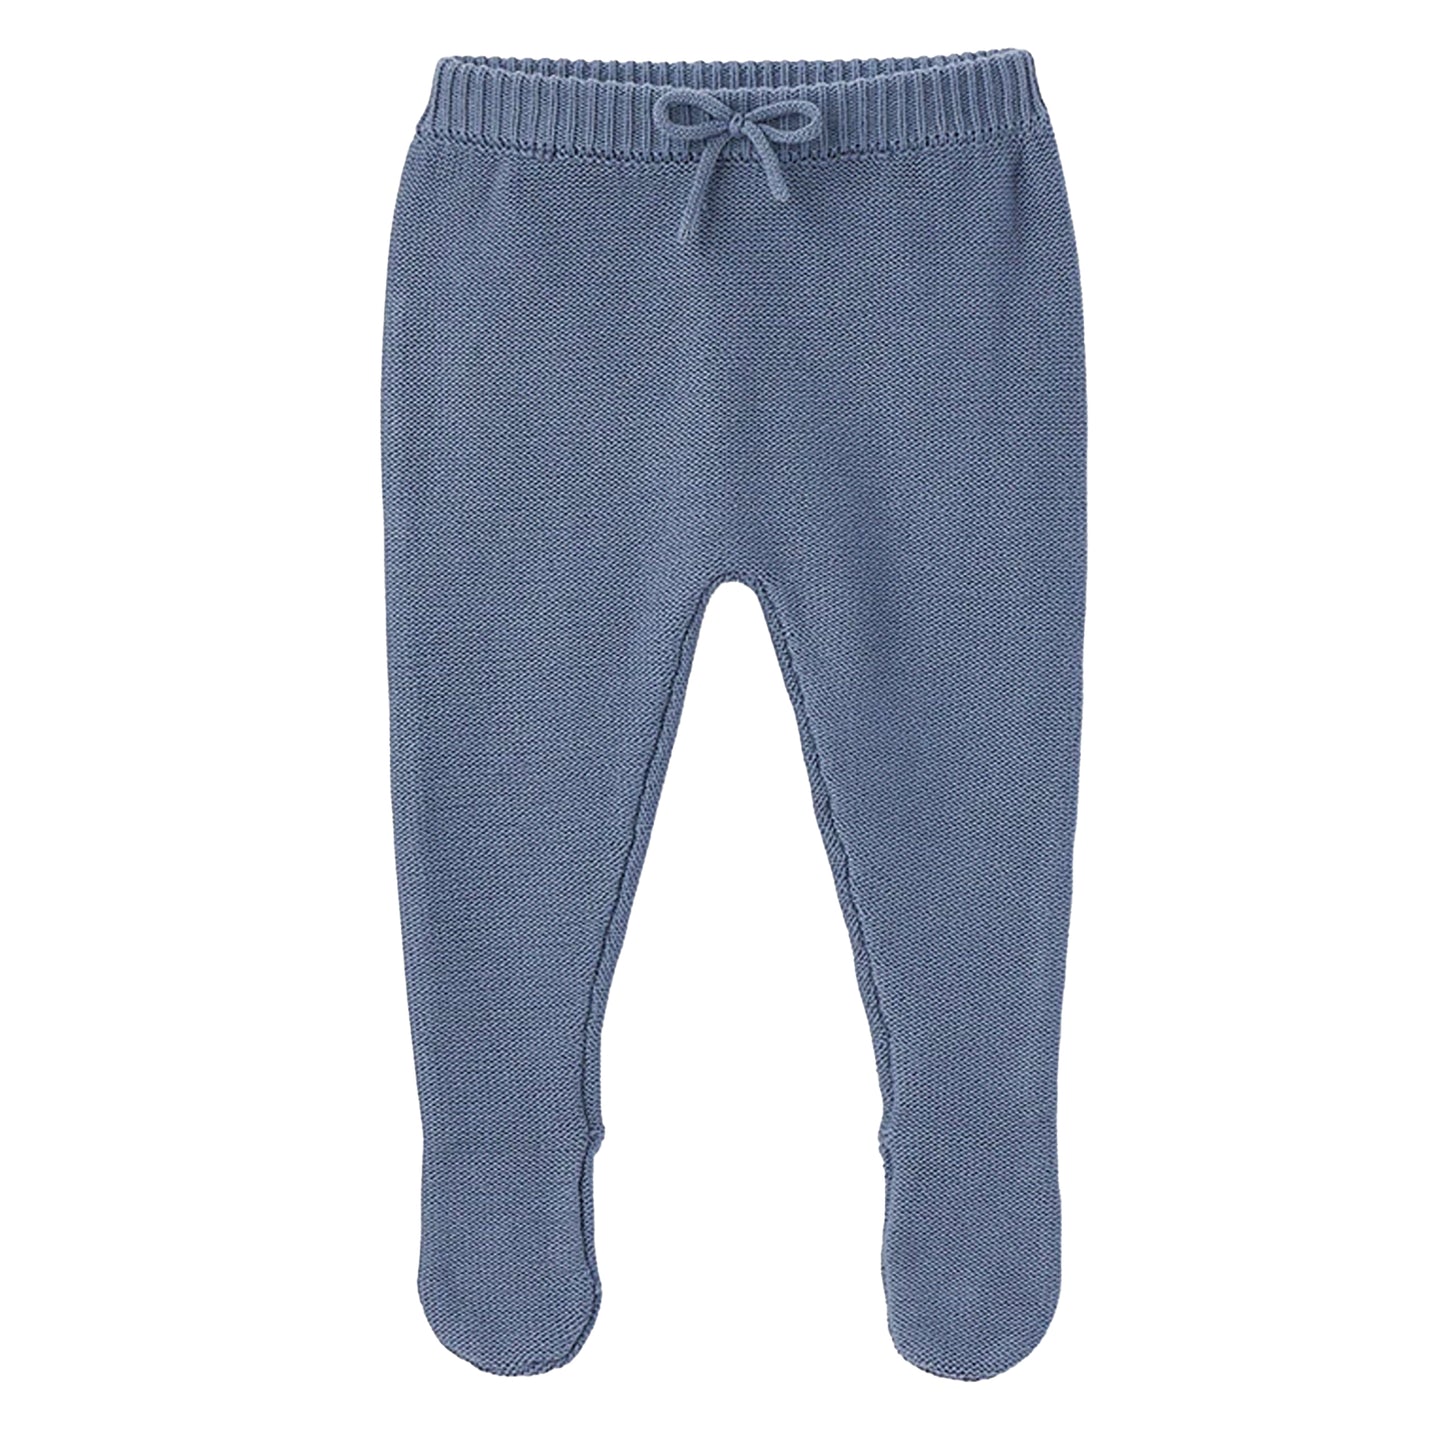 Garter Knit Footed Baby Pant, Slate Blue